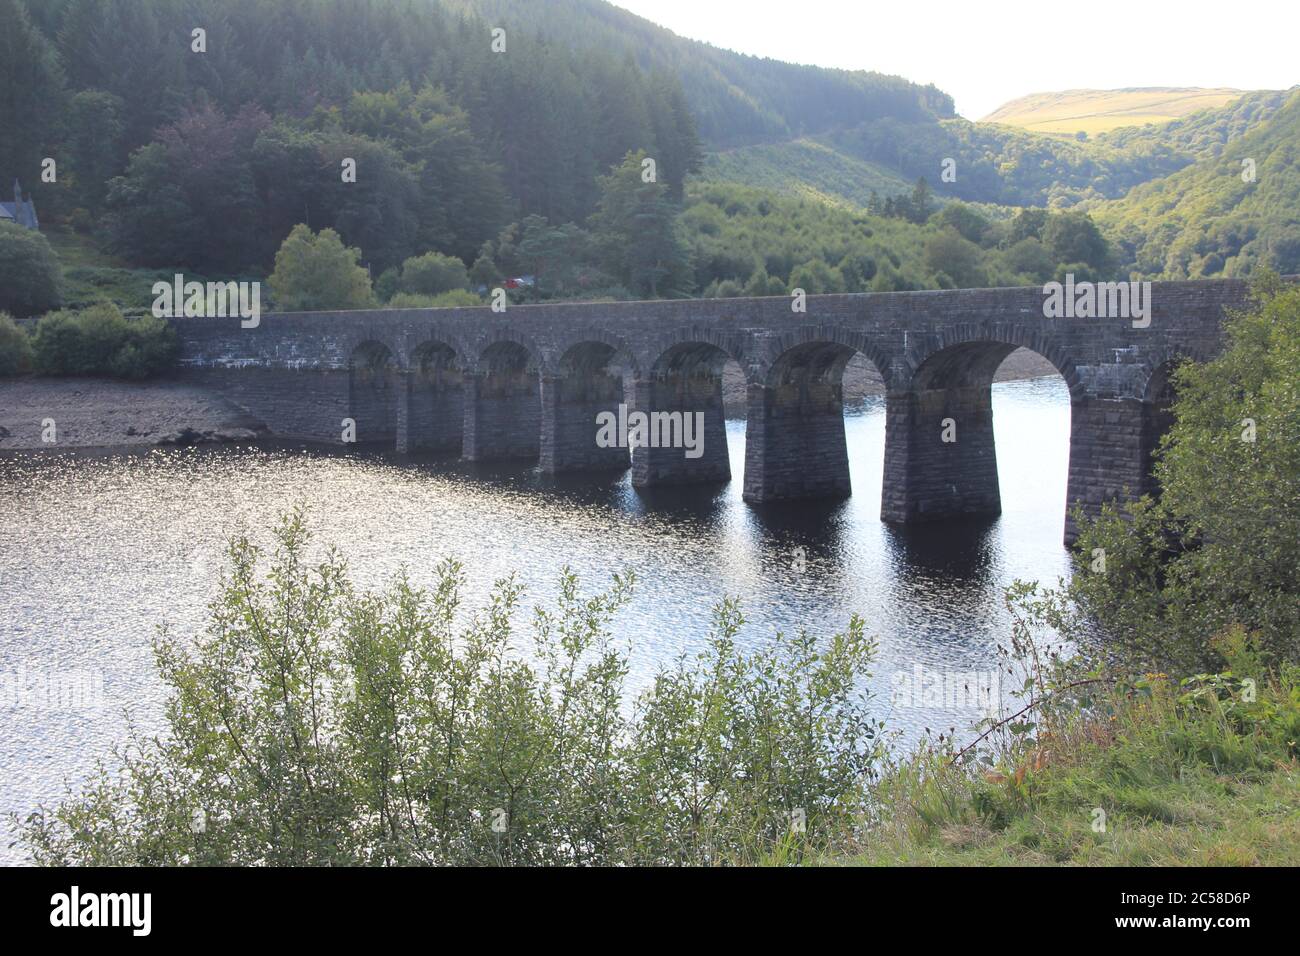 The Elan Valley Reservoirs in Wales, United Kingdom Stock Photo